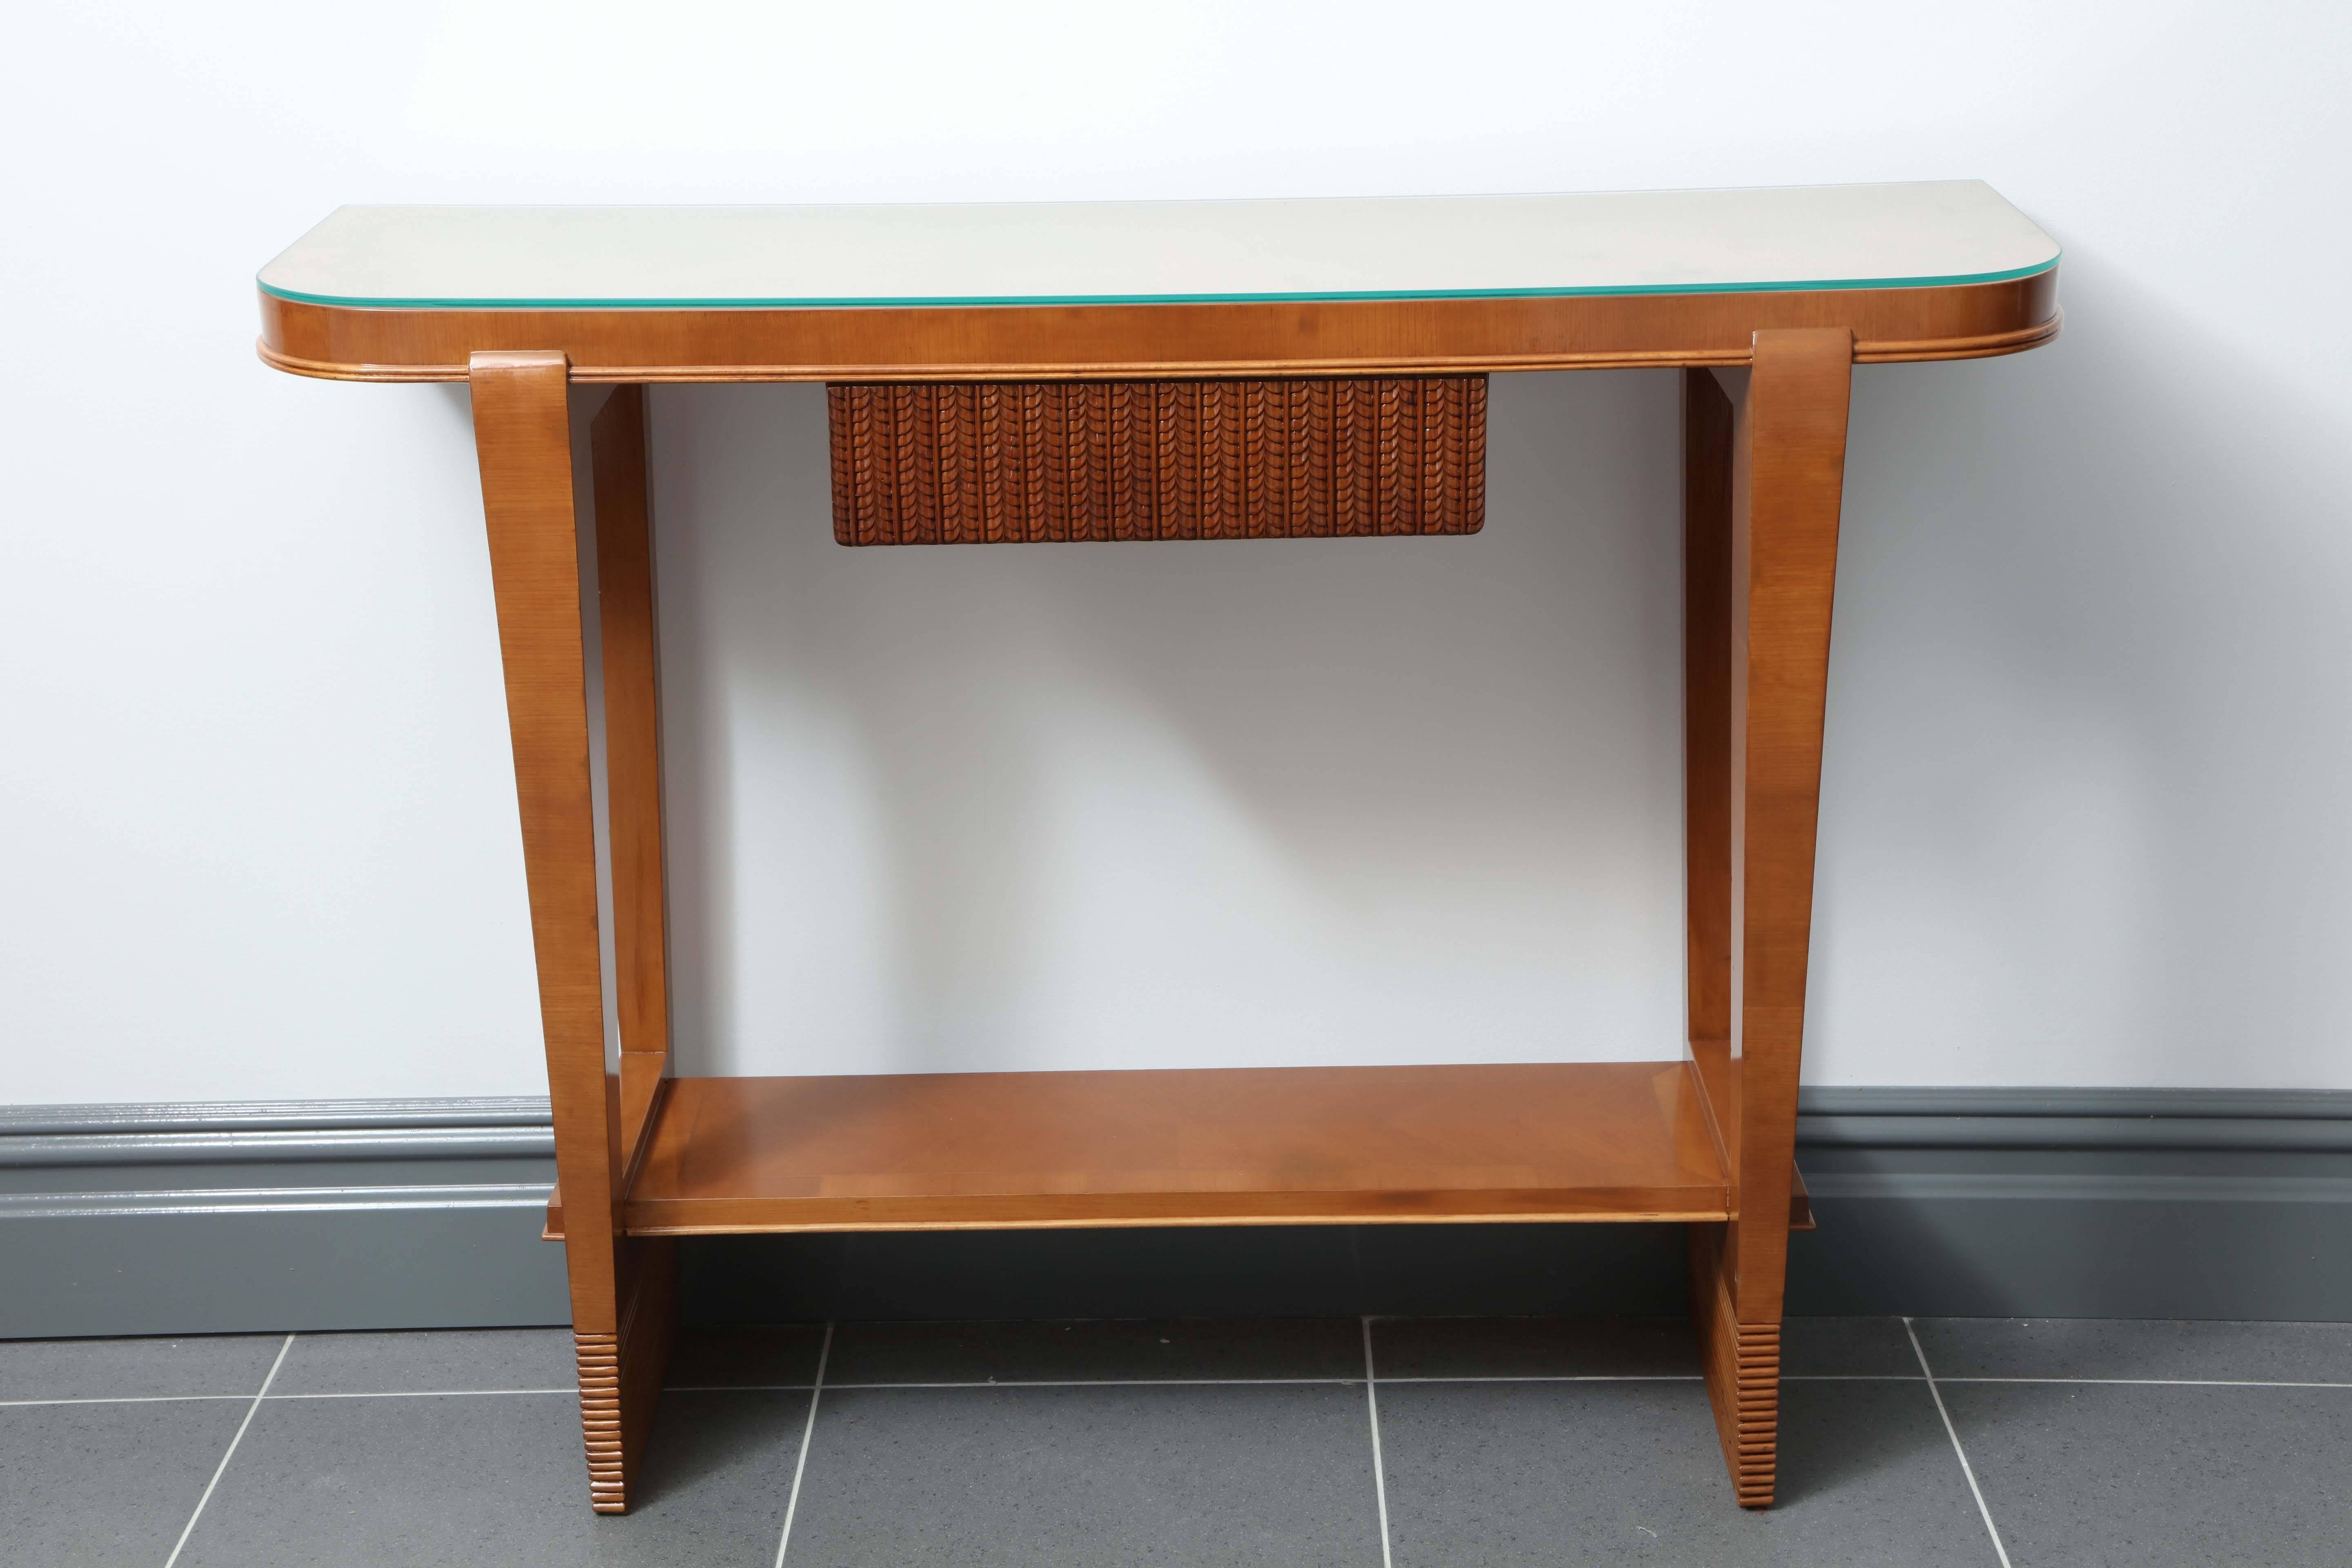 Stunning console designed by Osvaldo Borsani, made in 1936 in Milan by Atelier Borsani Varedo. 
Walnut with a centre drawer with a carved design of fern leaves, legs of console's has a channeled design, top in glass.
Great quality.